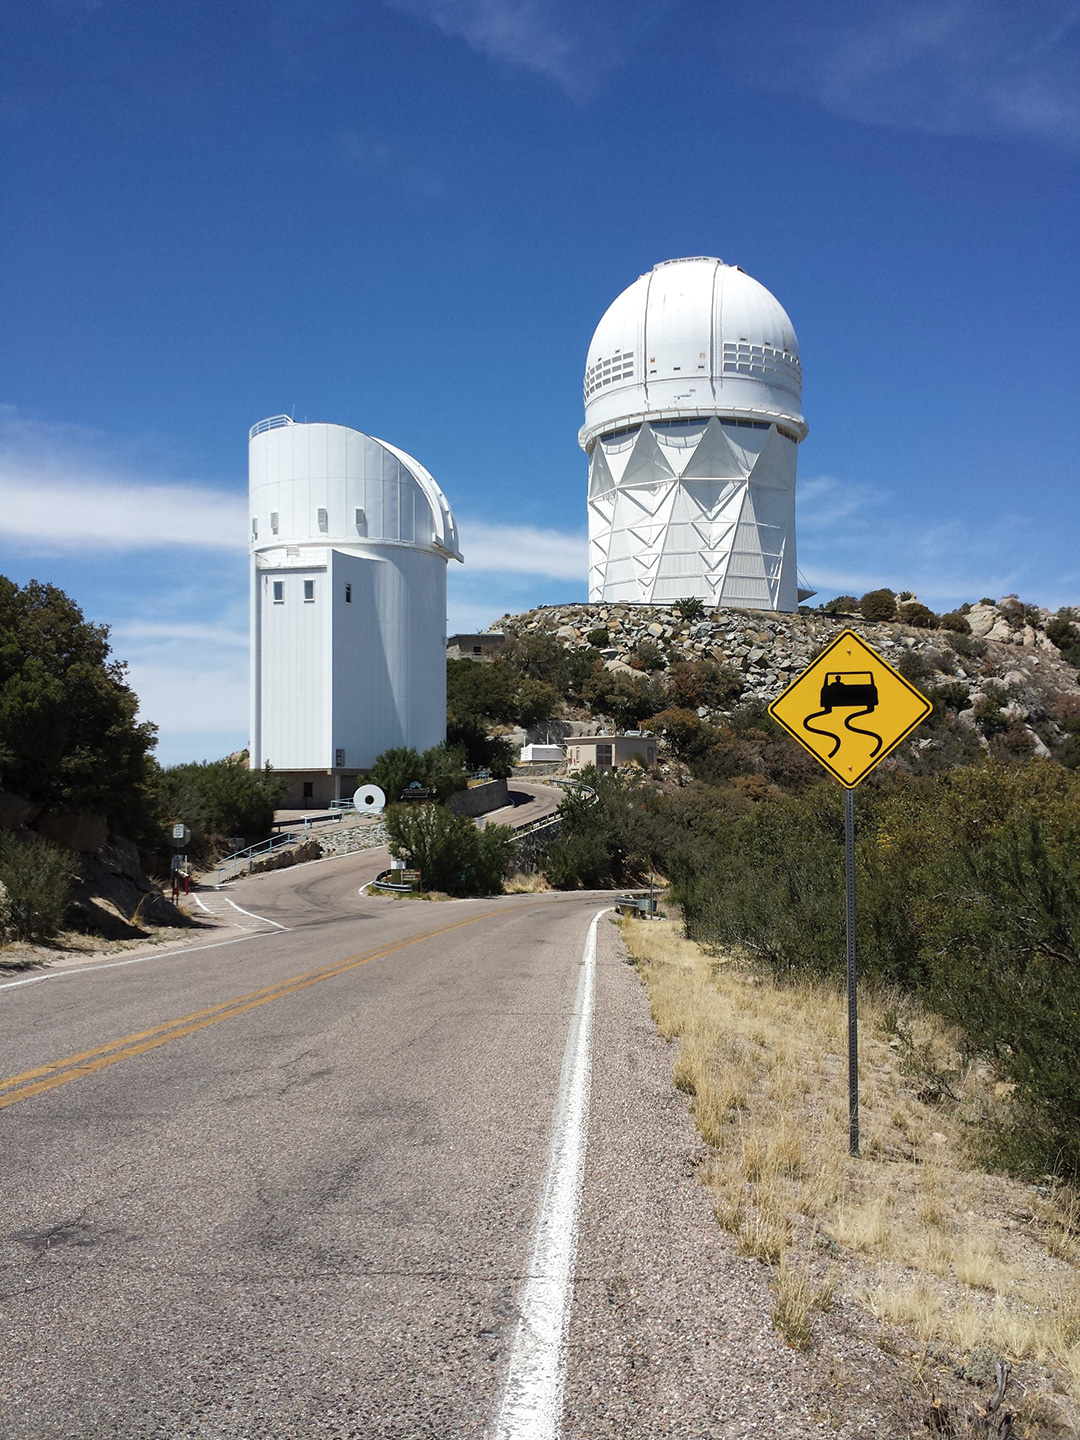 The Mayall telescope on Kit Peak, New Mexico, upon which DESI will rest. credit: Joseph Harry Silber